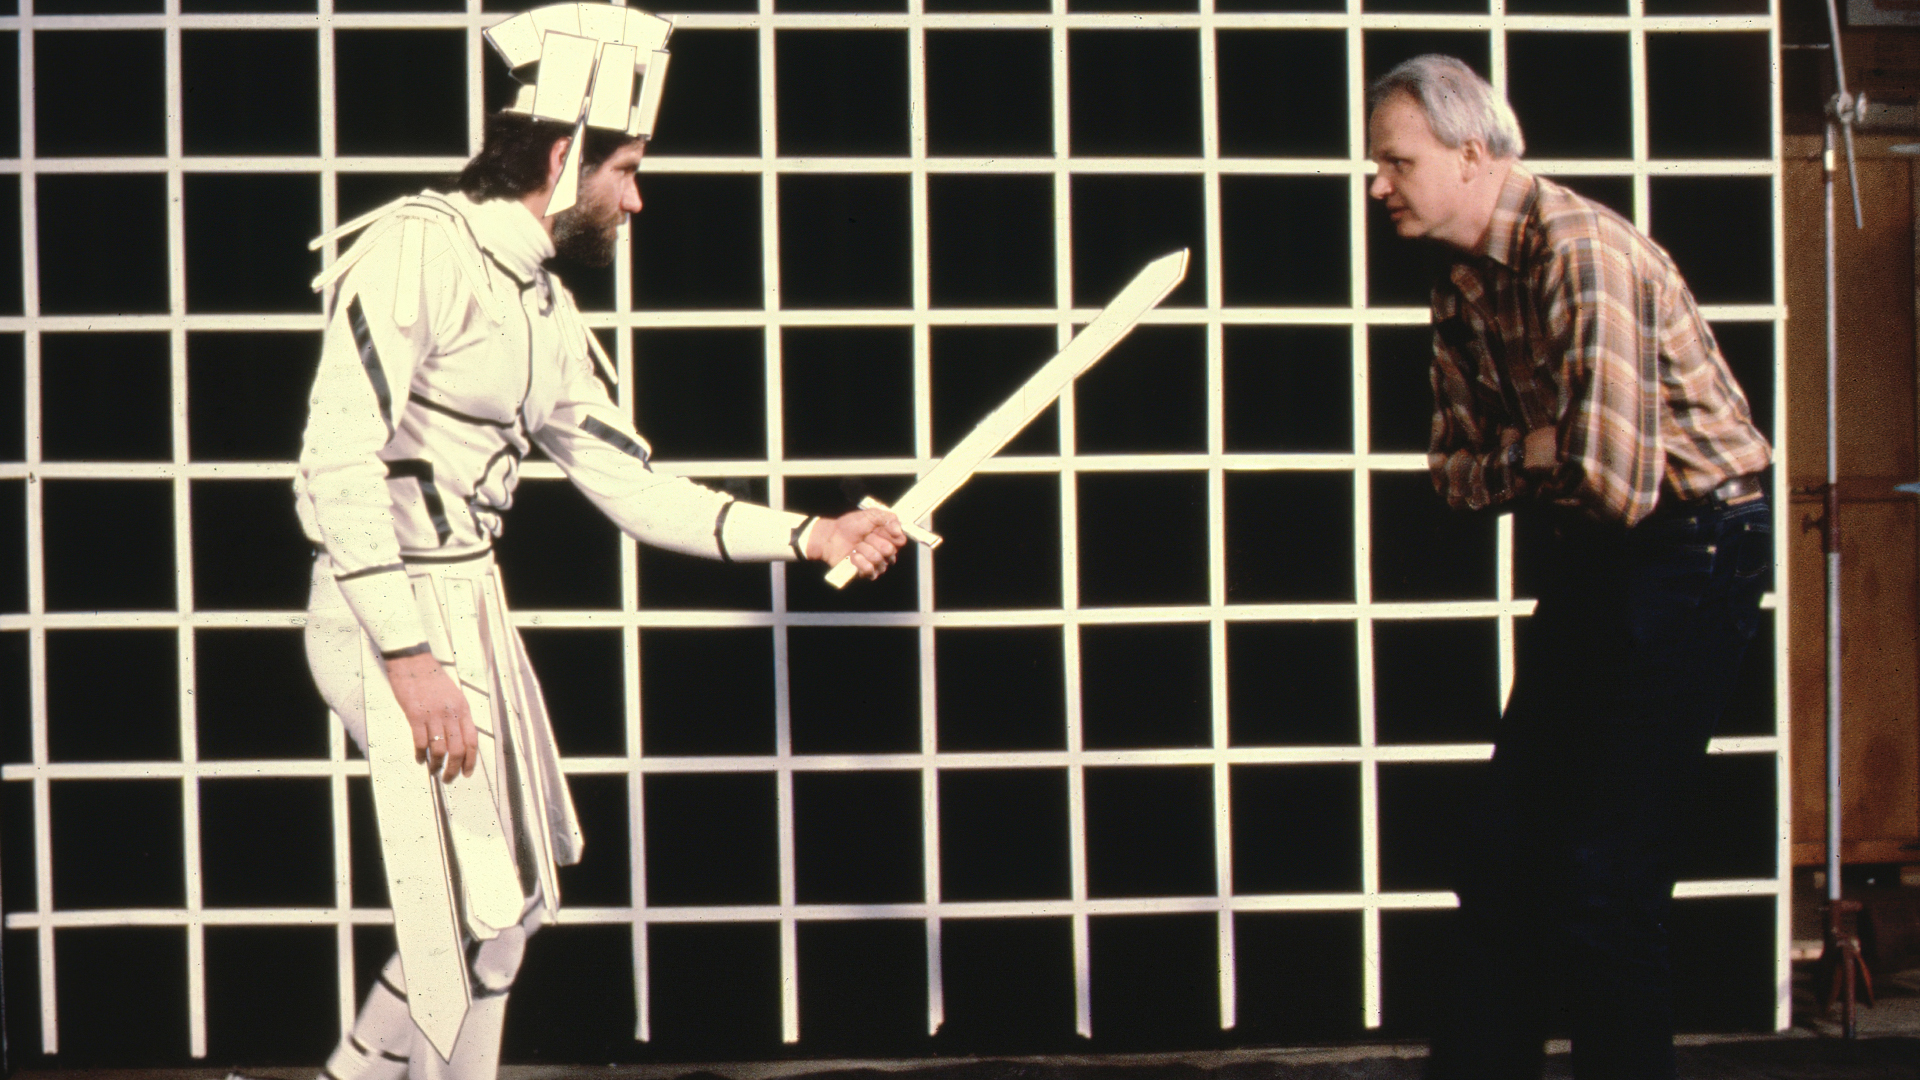 Visual Effects Supervisor Dennis Muren works with a performer against a grid while filming reference footage for animators to use when creating the performance of the stained glass man character in Young Sherlock Holmes (1985). © Industrial Light & Magic. All Rights Reserved.